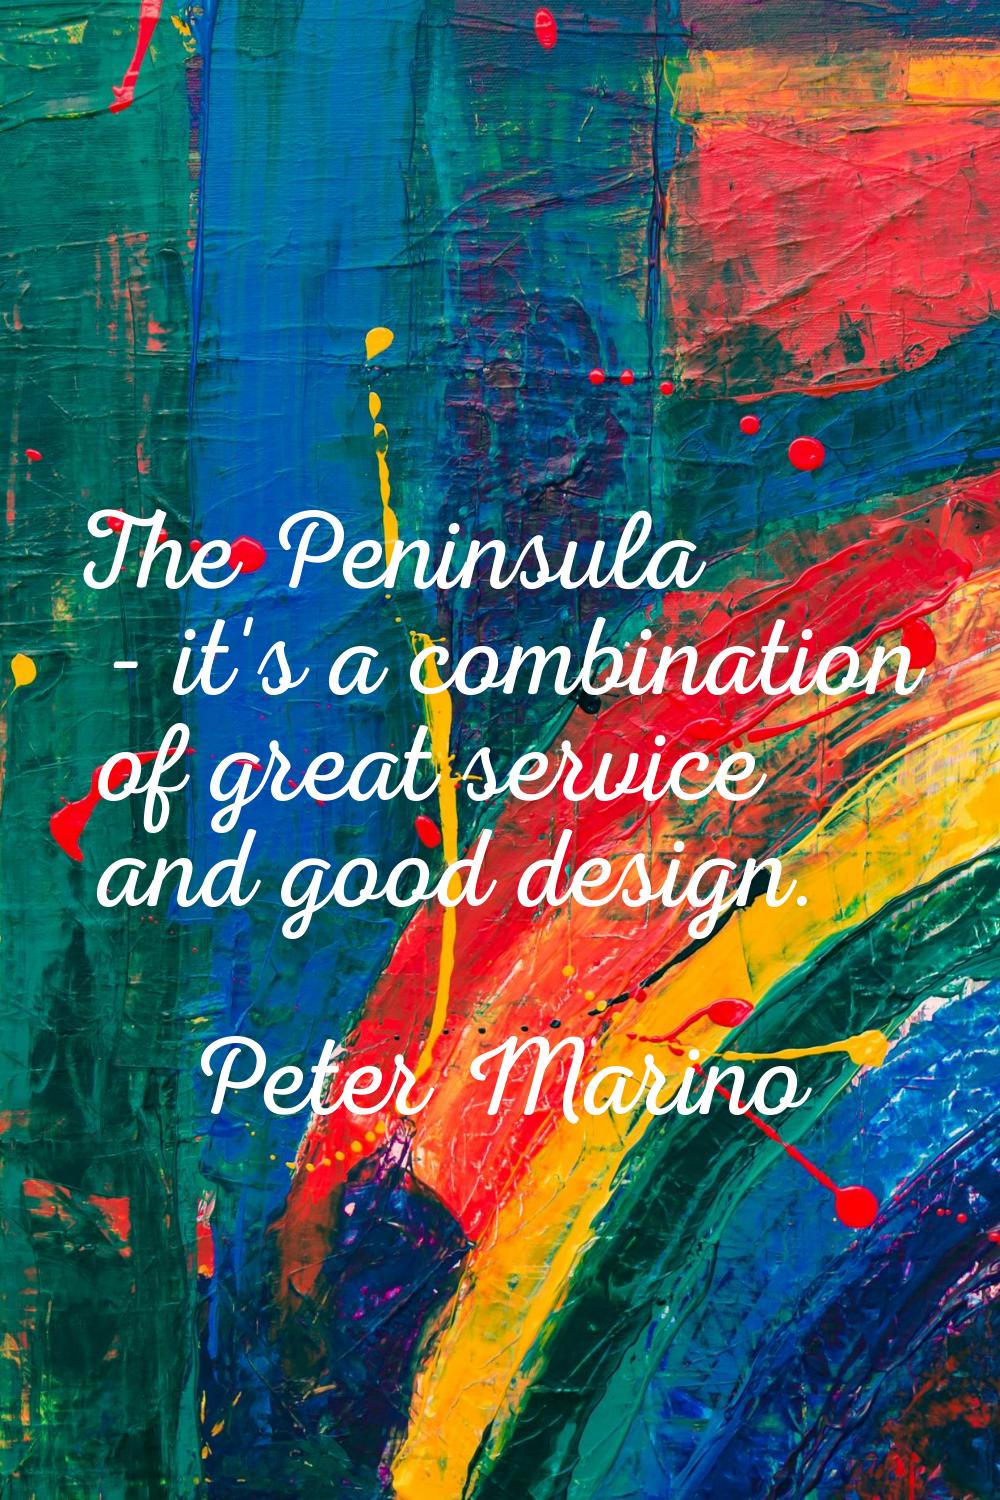 The Peninsula - it's a combination of great service and good design.